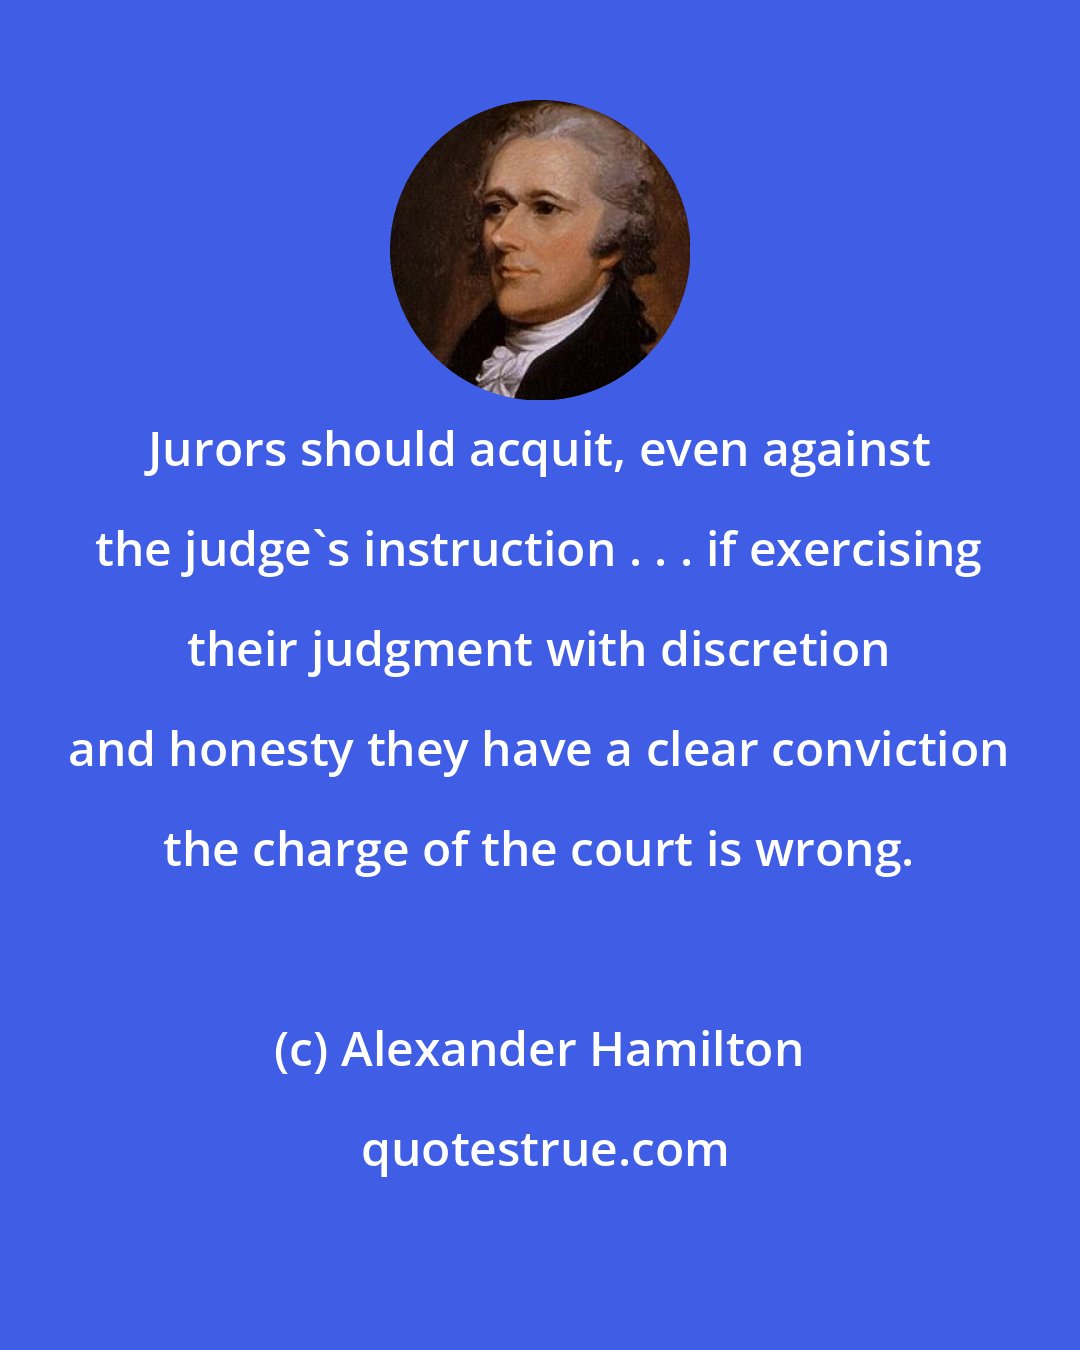 Alexander Hamilton: Jurors should acquit, even against the judge's instruction . . . if exercising their judgment with discretion and honesty they have a clear conviction the charge of the court is wrong.